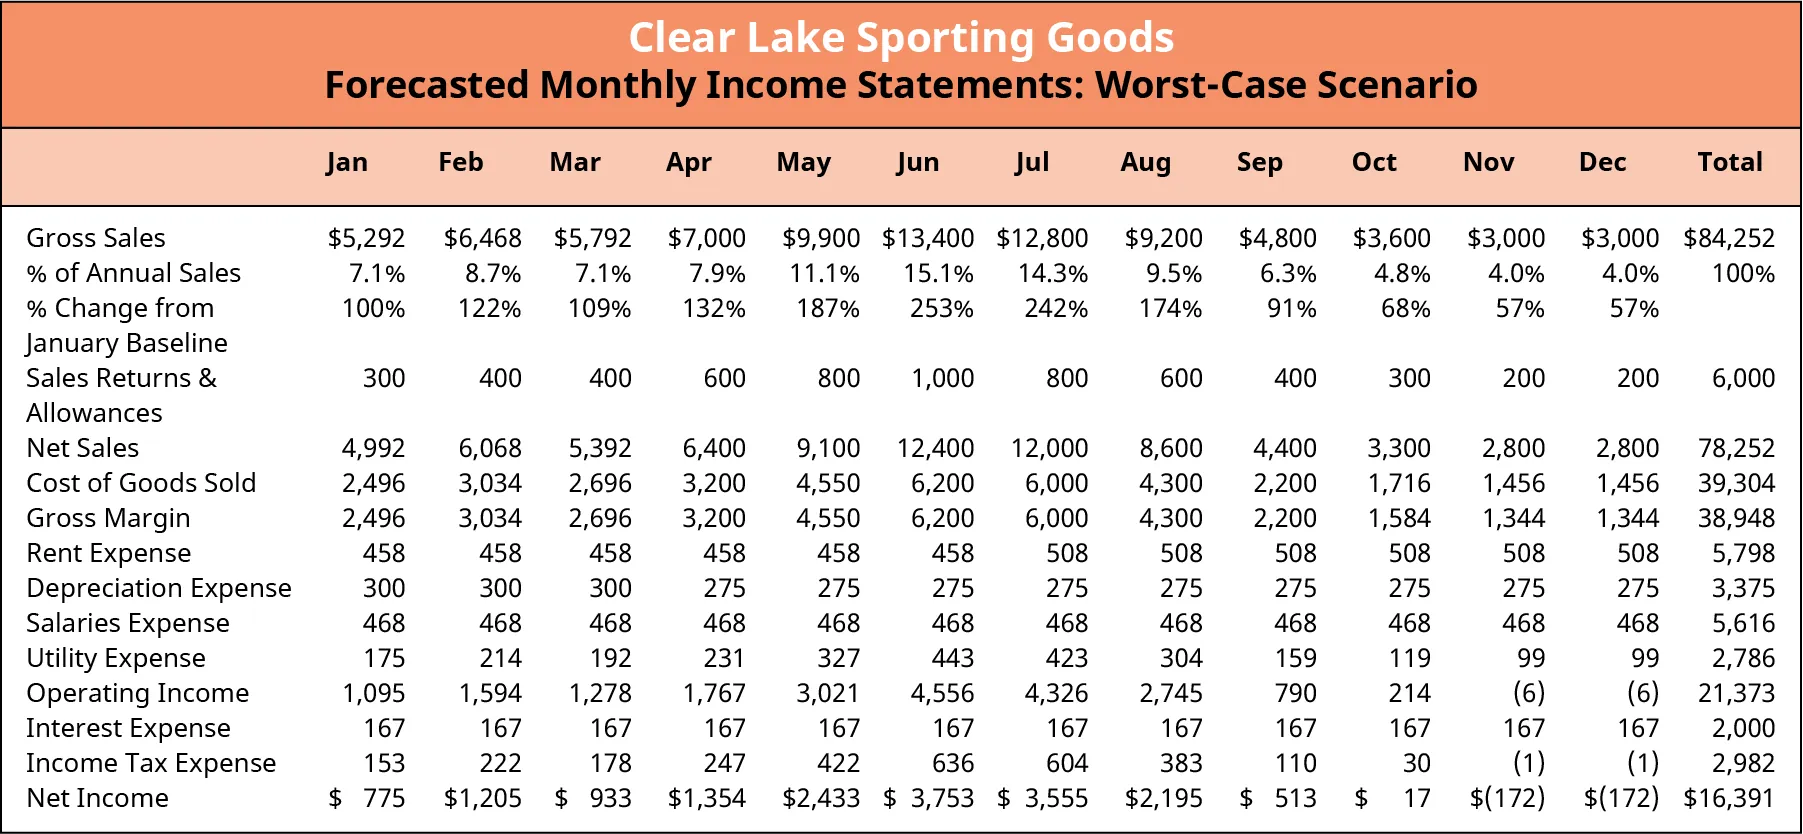 The worst case scenario forecasted monthly income statements for Clear Lake Sporting Goods shows gross sales, sales returns, allowances, net sales, cost of goods sold, gross margins, expenses, and net income for January through December. This forecast assumes sales drop 60% from the prior year; the sales and income numbers in this statement reflect the lower estimate.